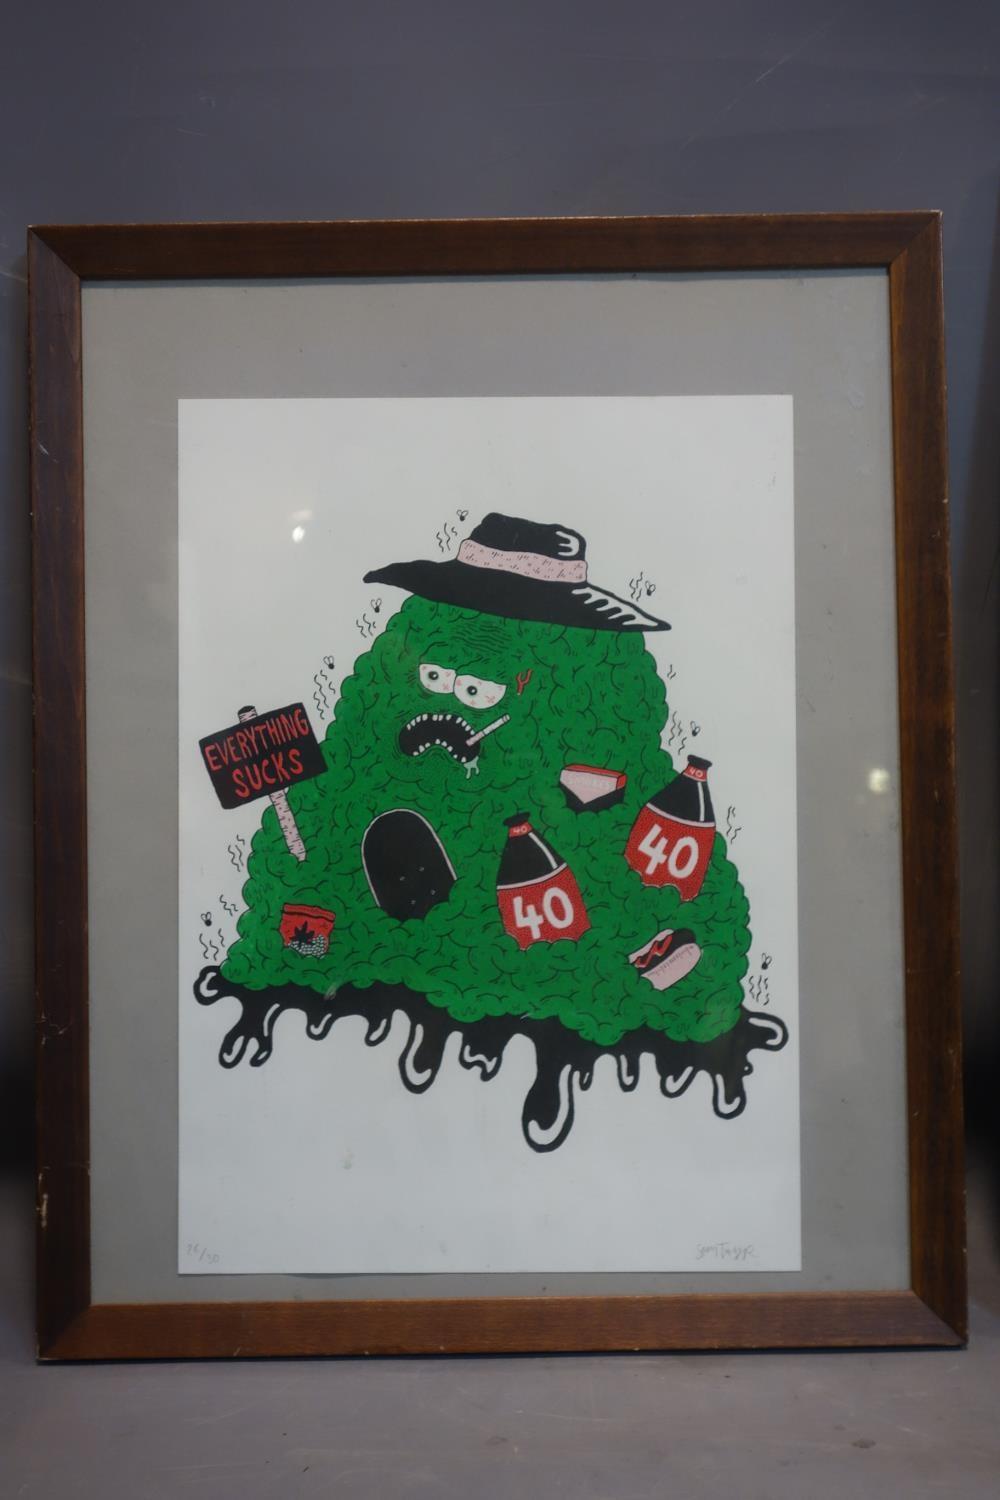 A limited edition lithograph titled 'everything sucks', indistinctly signed and numbered 26/30, 42 x - Image 2 of 3